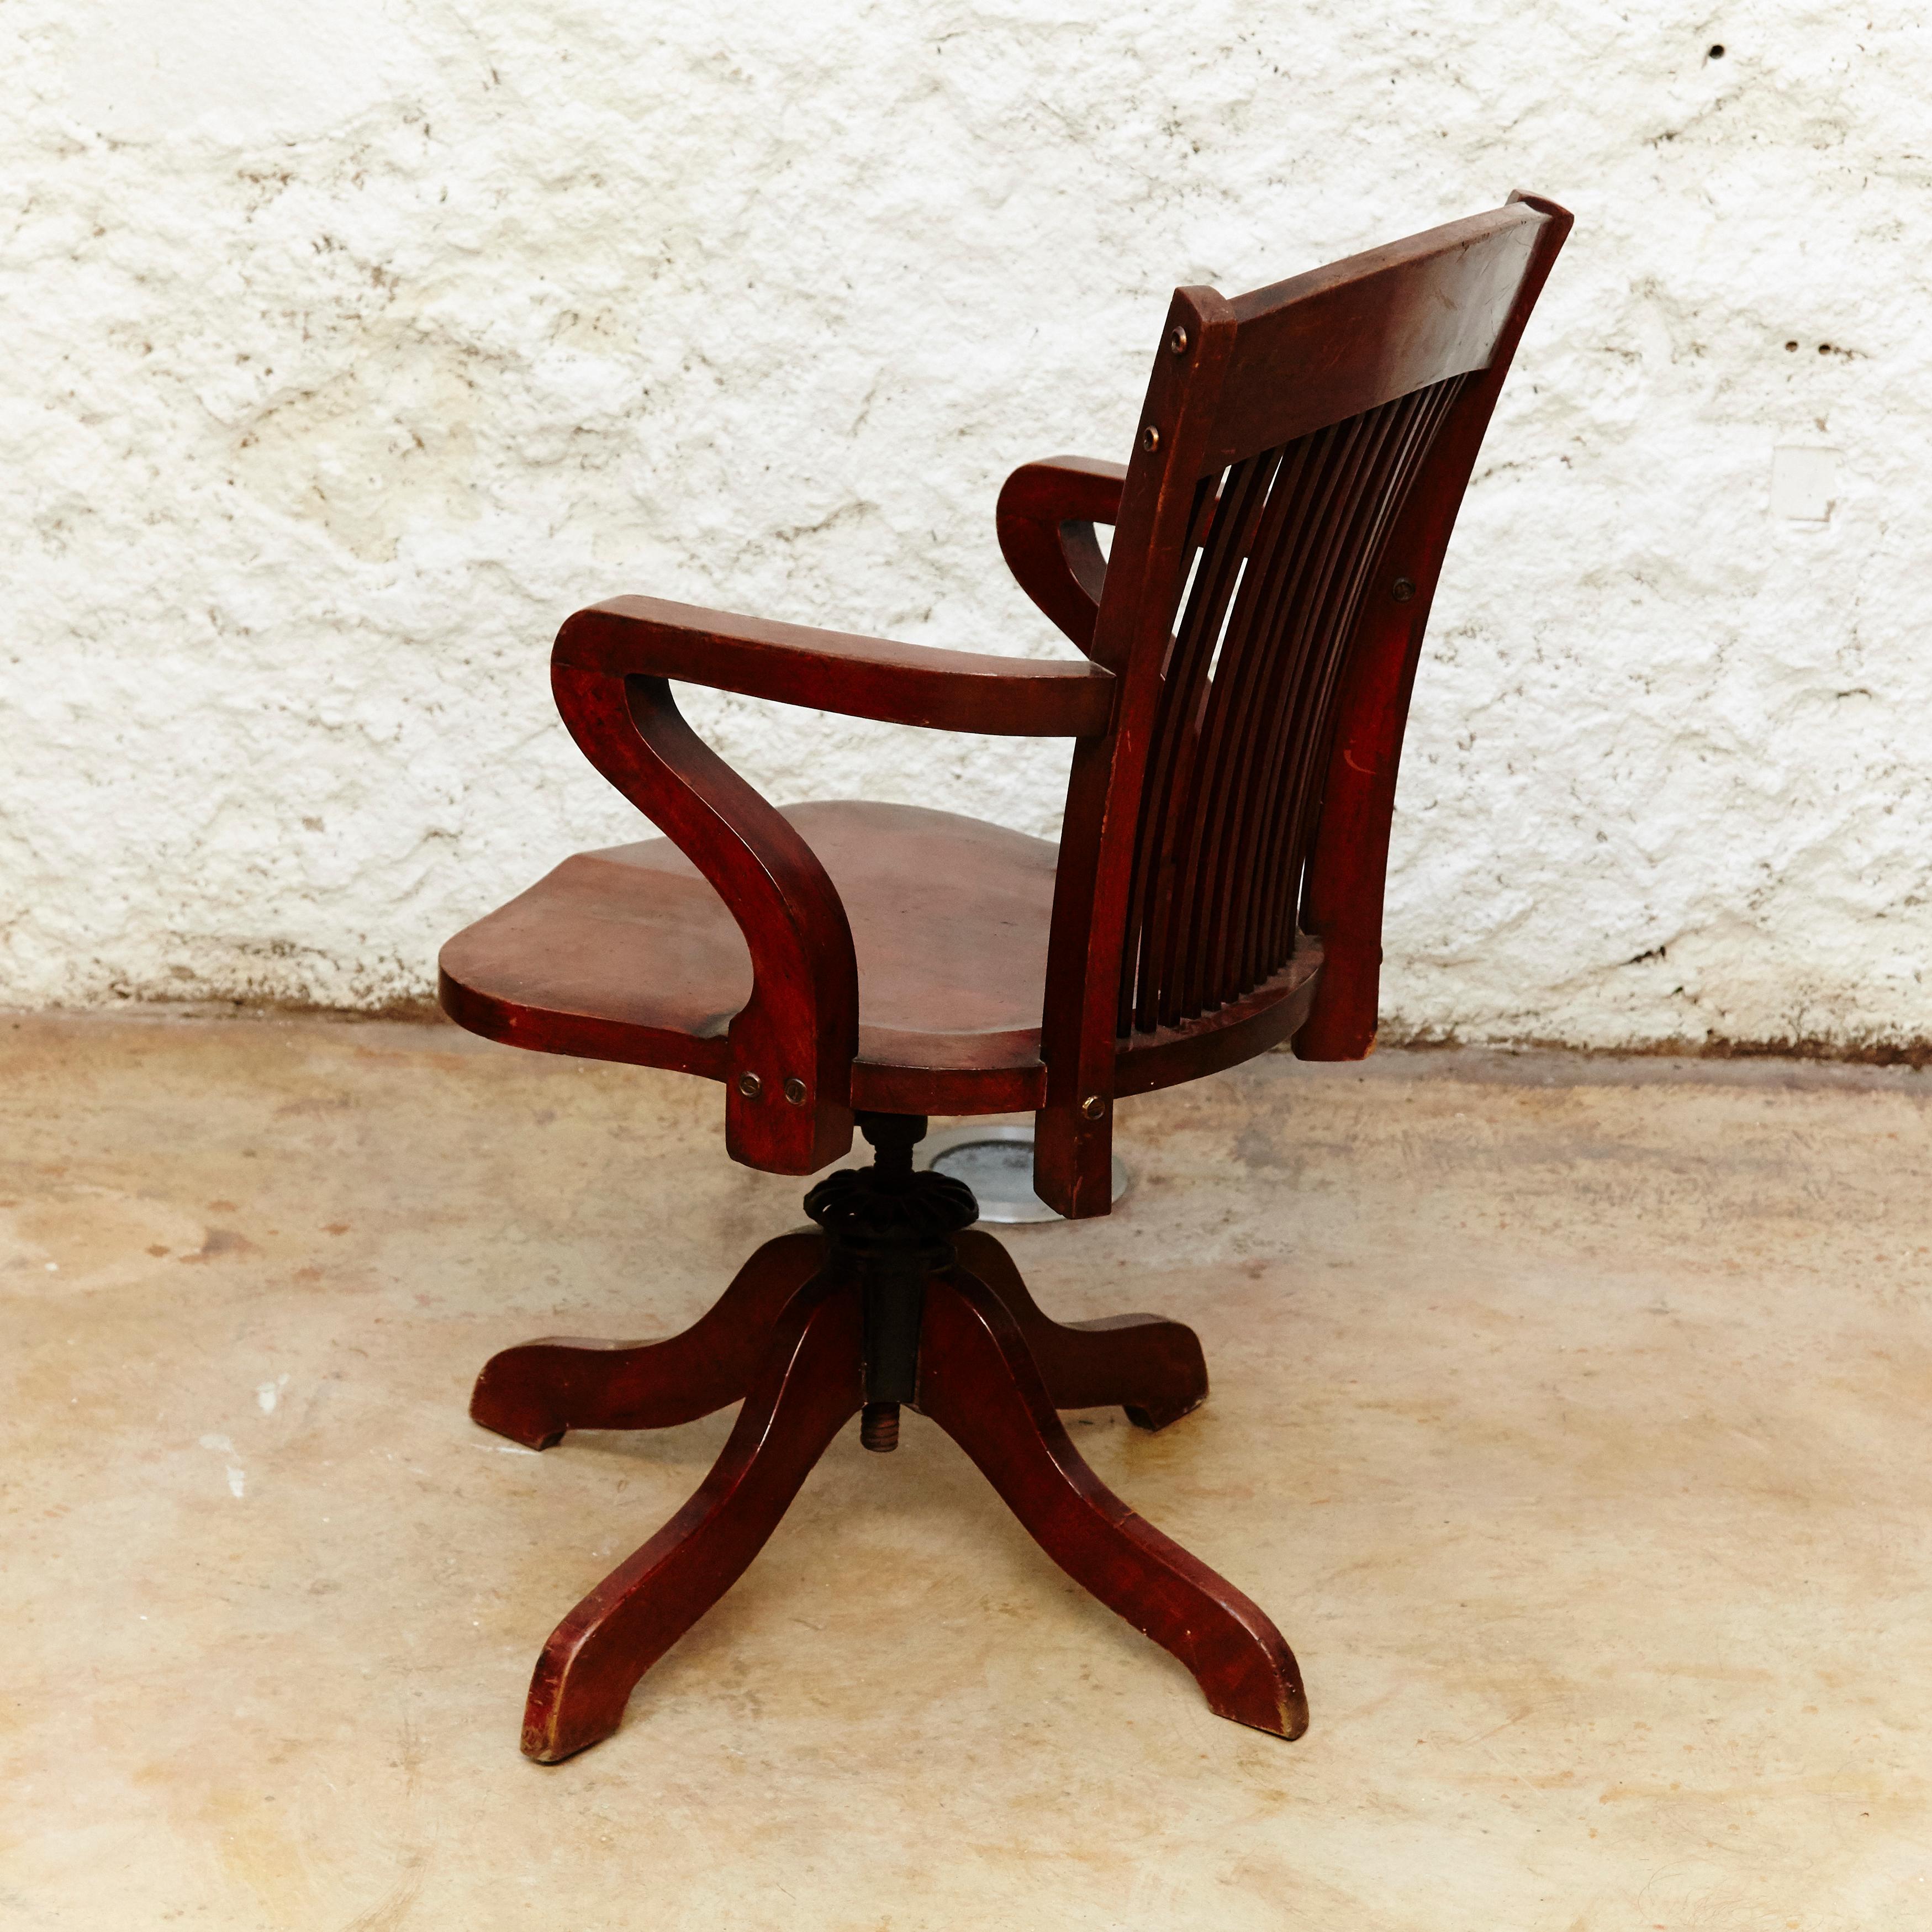 Modernist swivel chair by unknown designer.
Manufactured in Barcelona circa 1940.
Wood.

In original condition with minor wear consistent of age and use, preserving a beautiful patina.